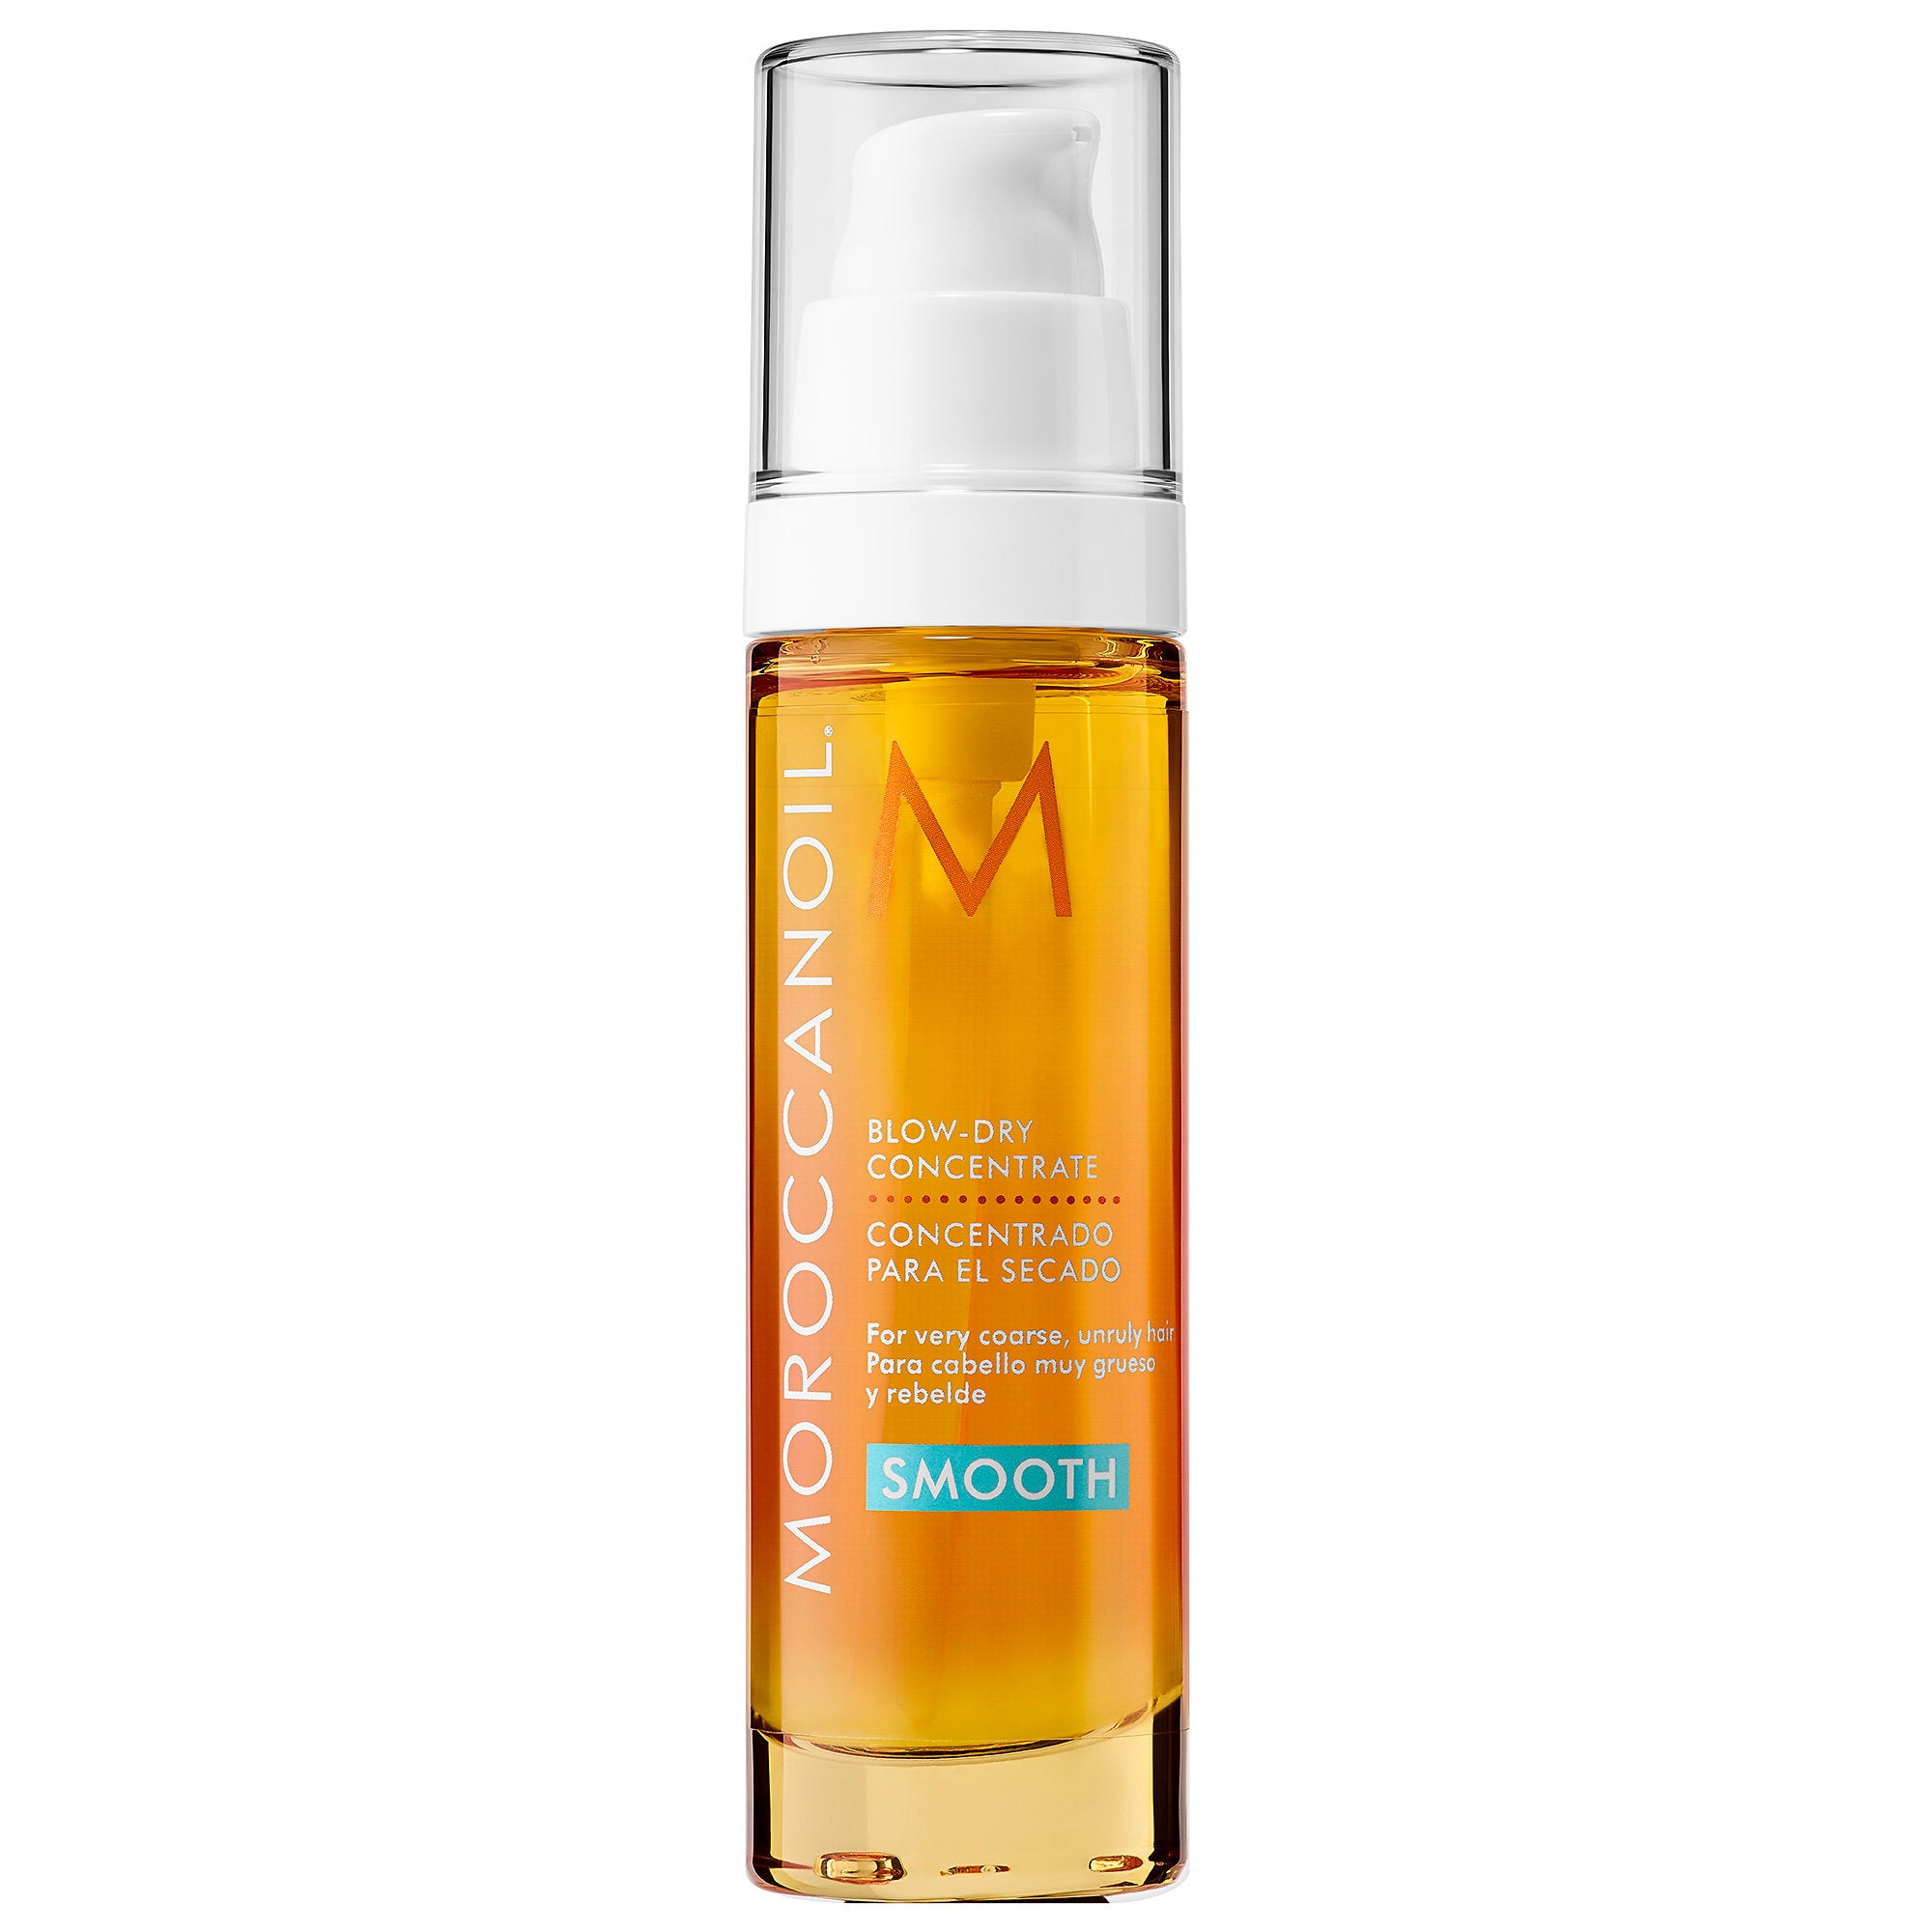 Moroccanoil Blow Dry Concentrate for Shine Smooth Silky Hair